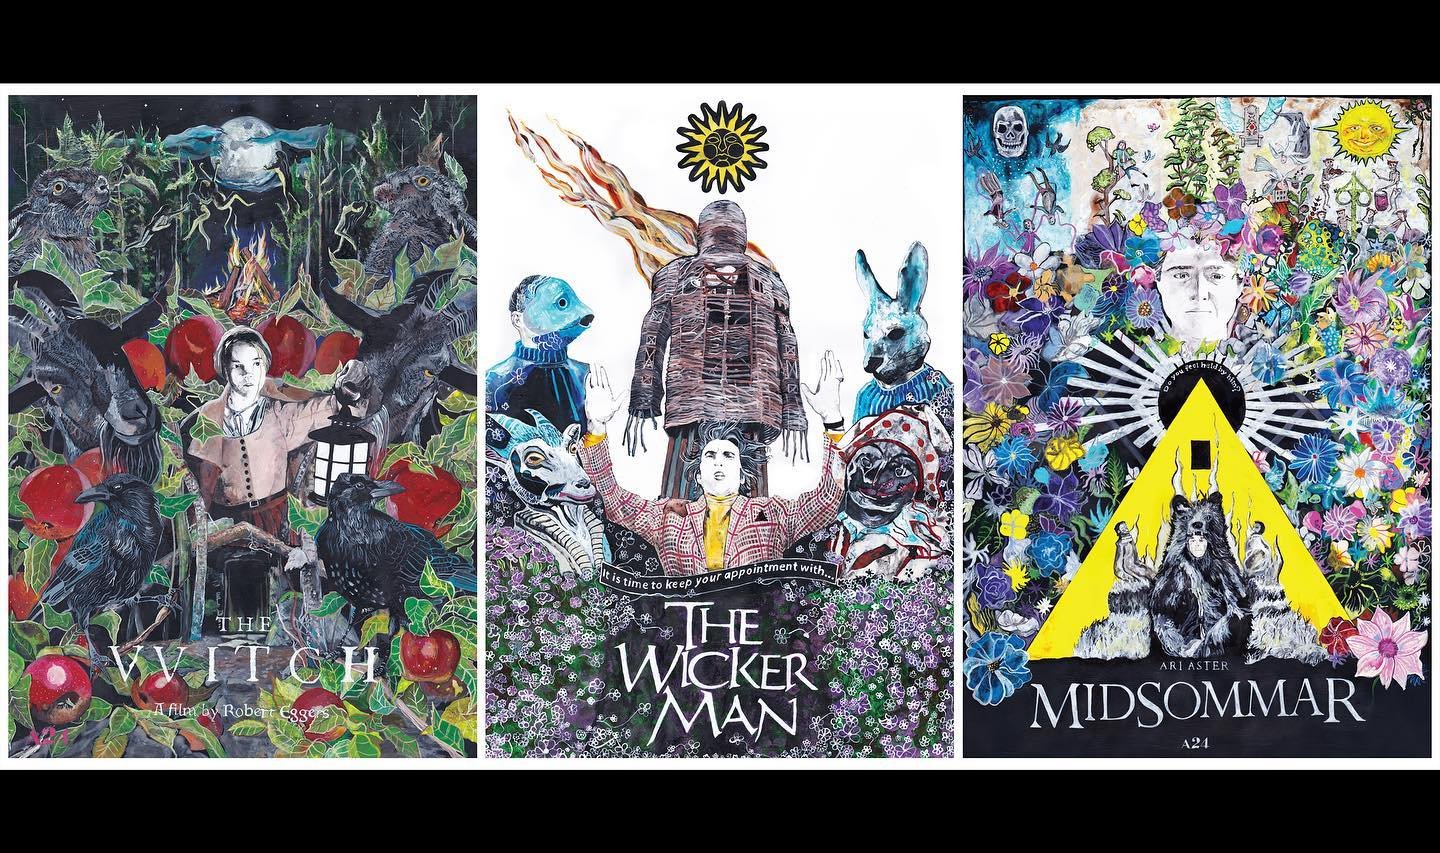 I love me some folk horror! Three paintings I&rsquo;ve made - The Witch, The Wicker Man, Midsommar. All acrylic on paper. 

#thewitch #thevvitch #roberteggers #thewitch2015 #thewickerman #wickerman #midsommar #midsommarmovie #folkhorror #a24 #a24film